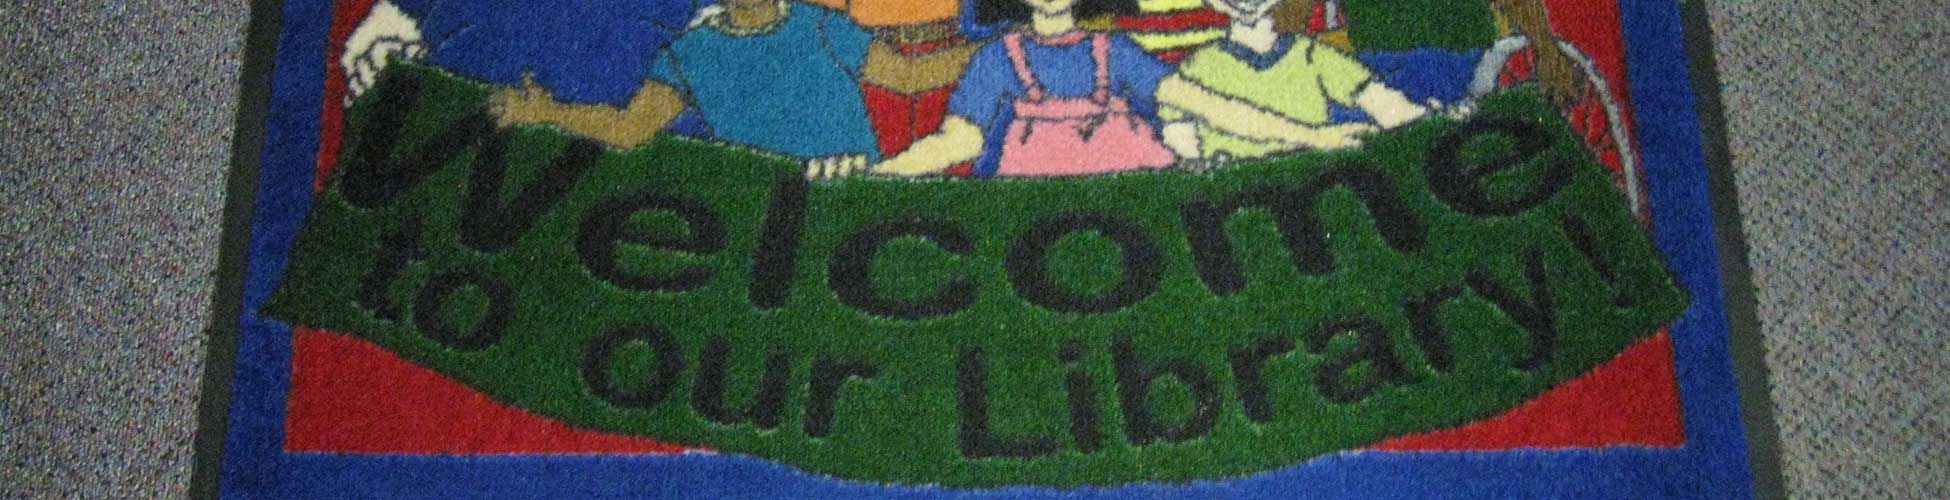 Library Welcome Rug